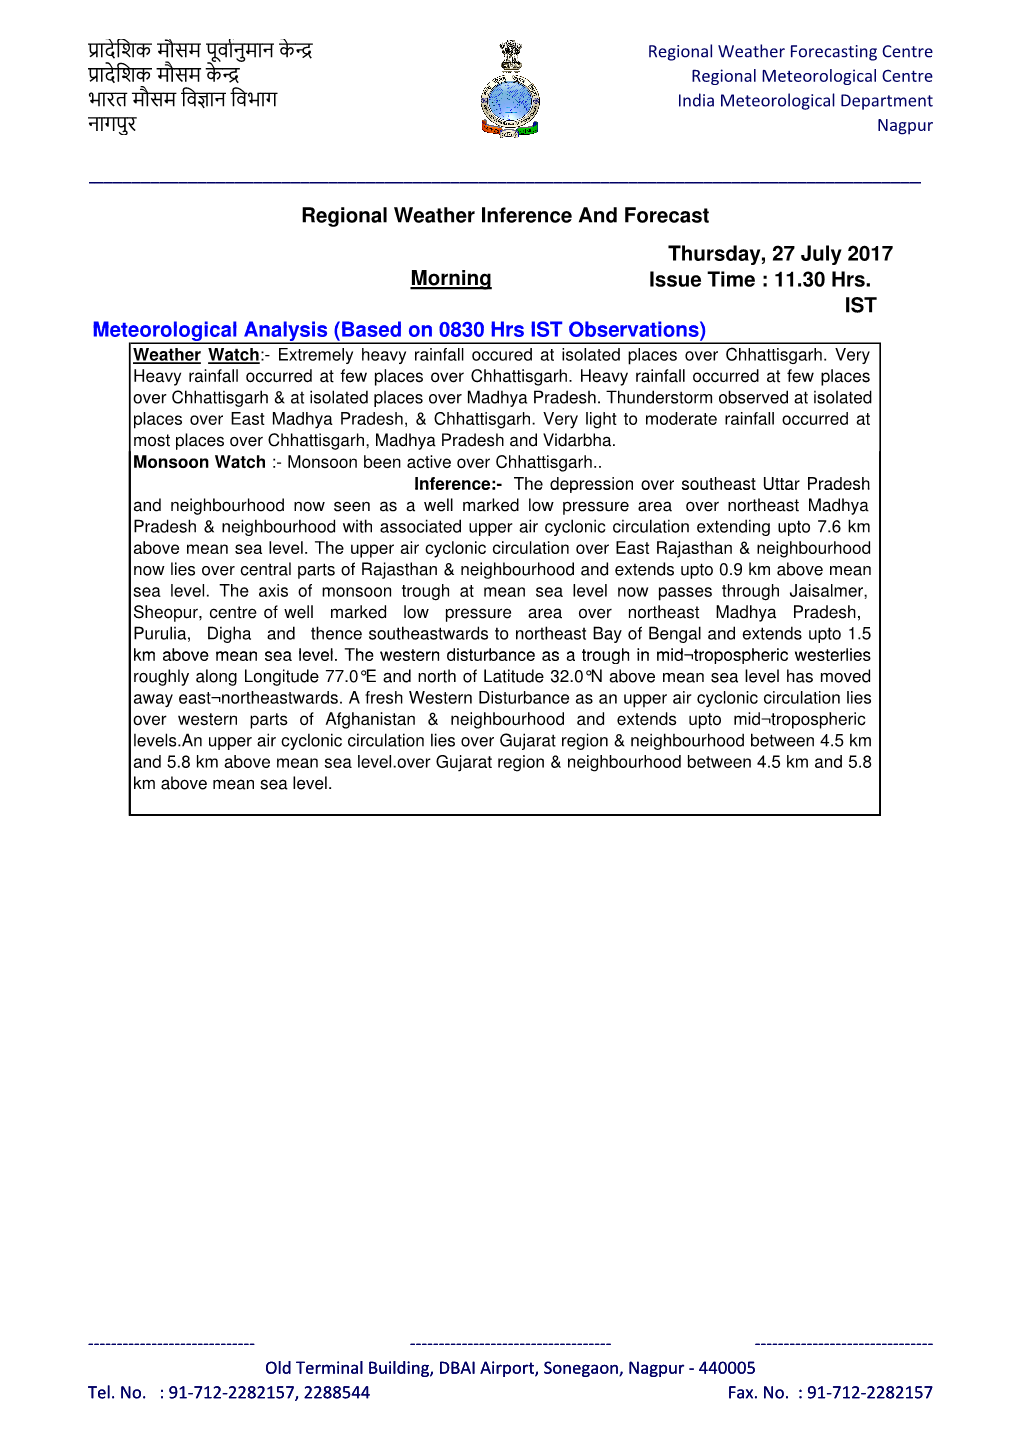 Regional Weather Inference and Forecast Thursday, 27 July 2017 Morning Issue Time : 11.30 Hrs